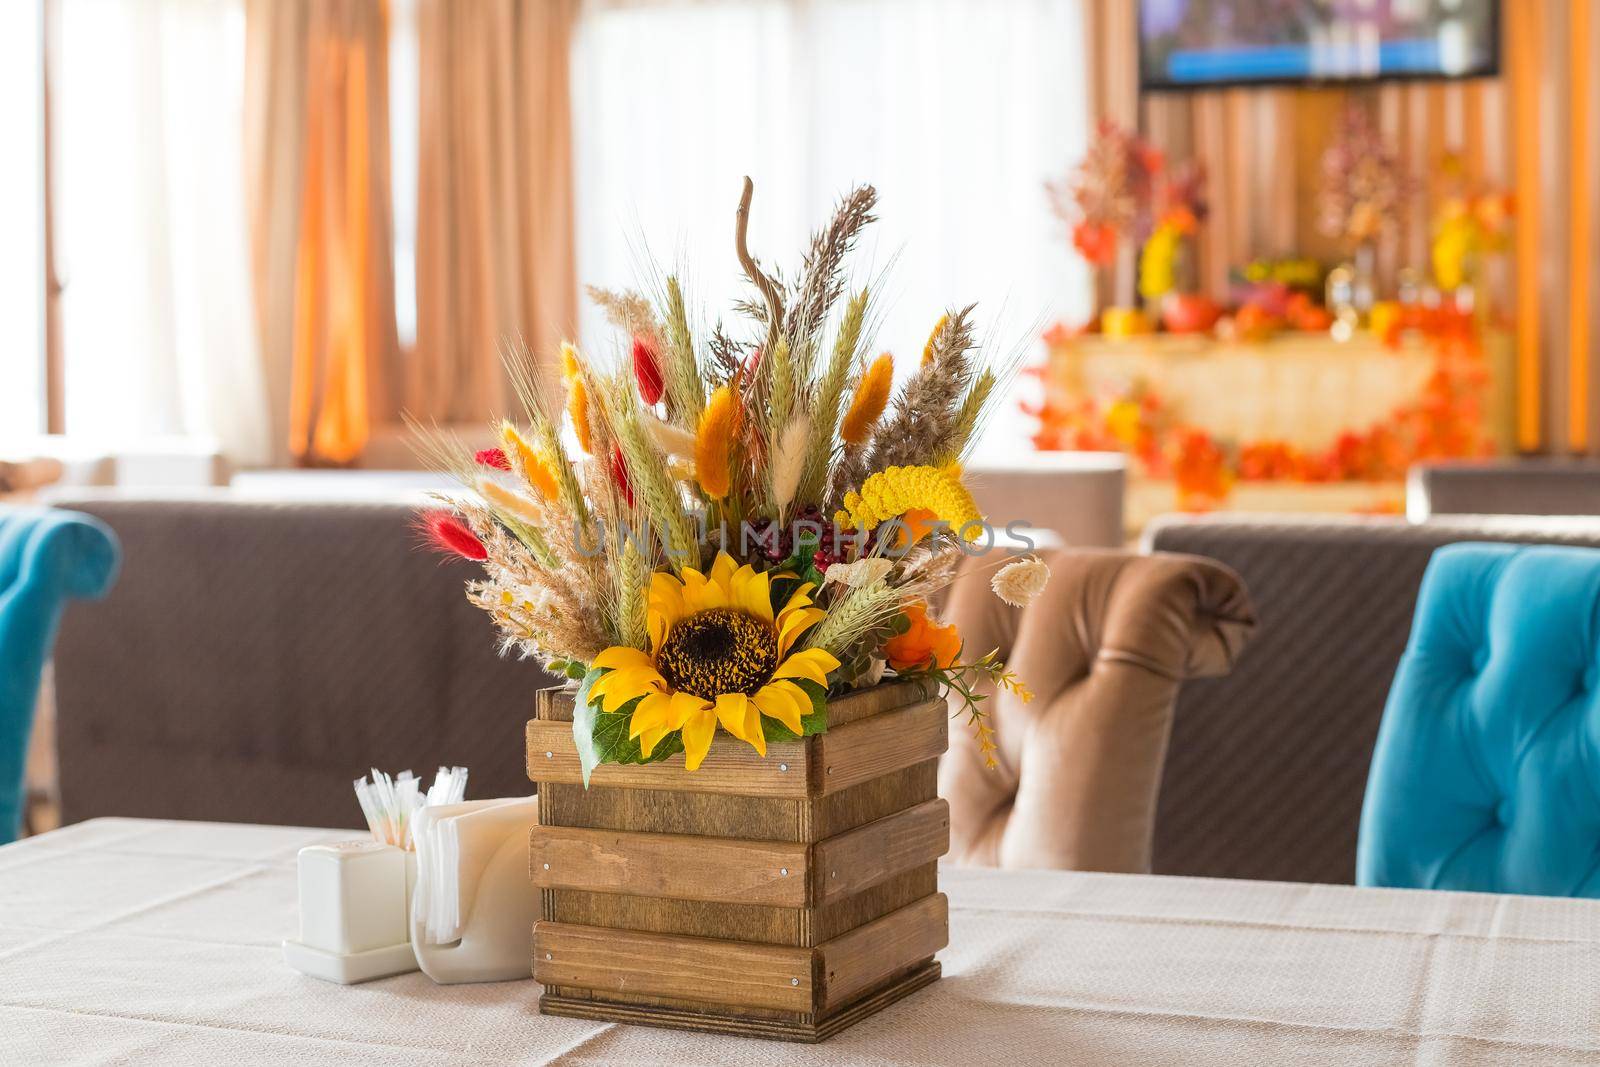 Fall and autumn floral arrangement on home's coffee table - ideal for Thanksgiving holidays